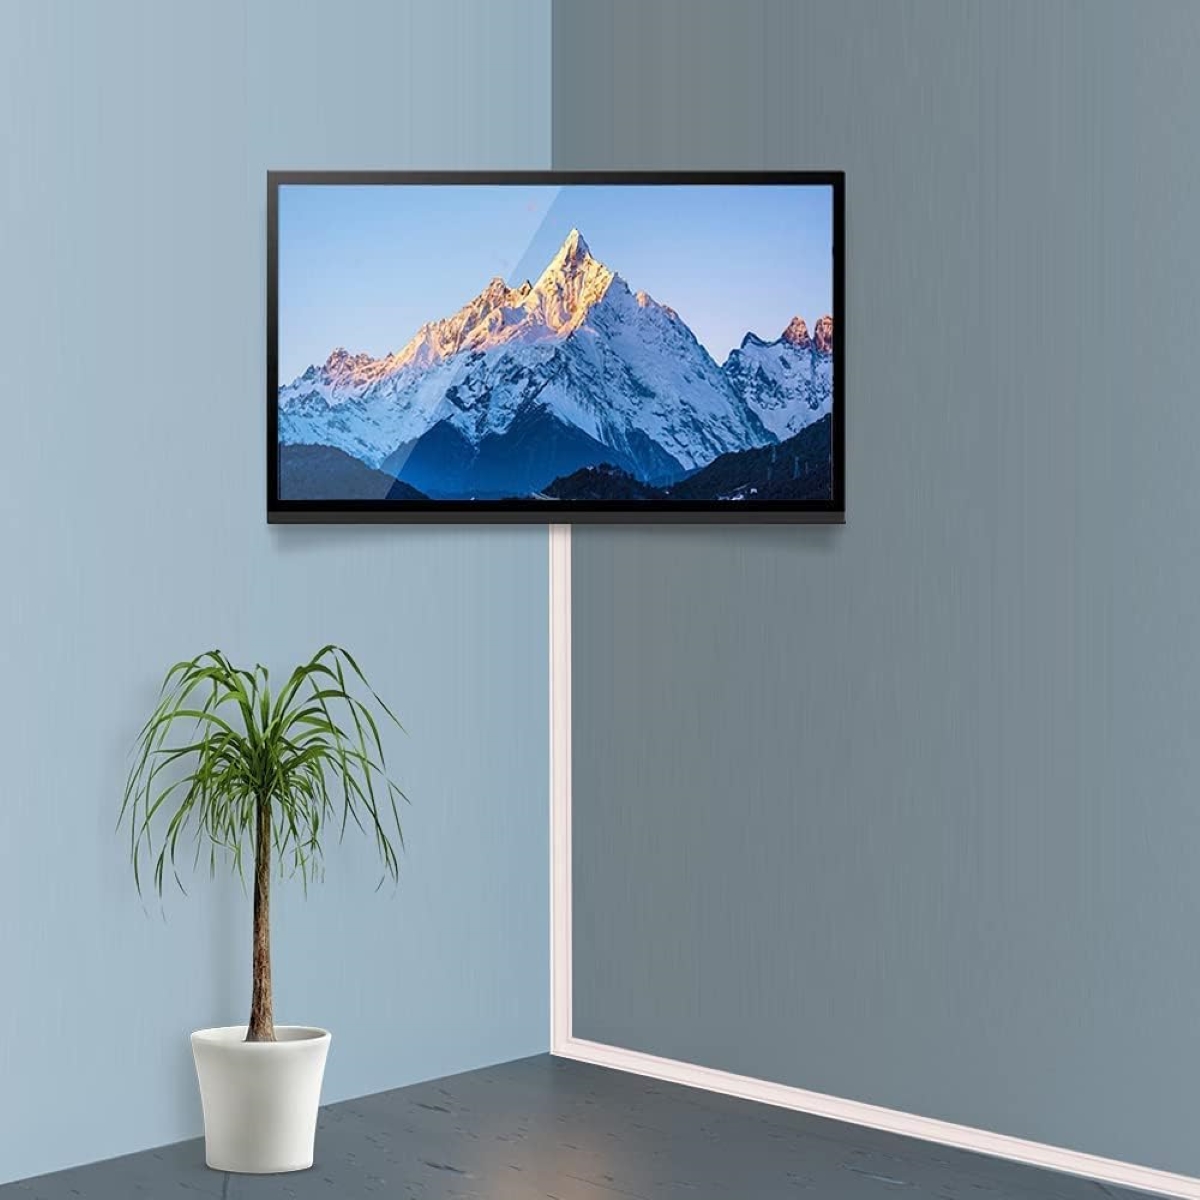 Cord cover raceway runs up the length of the wall to a TV; surrounding walls are in different shades of blue.